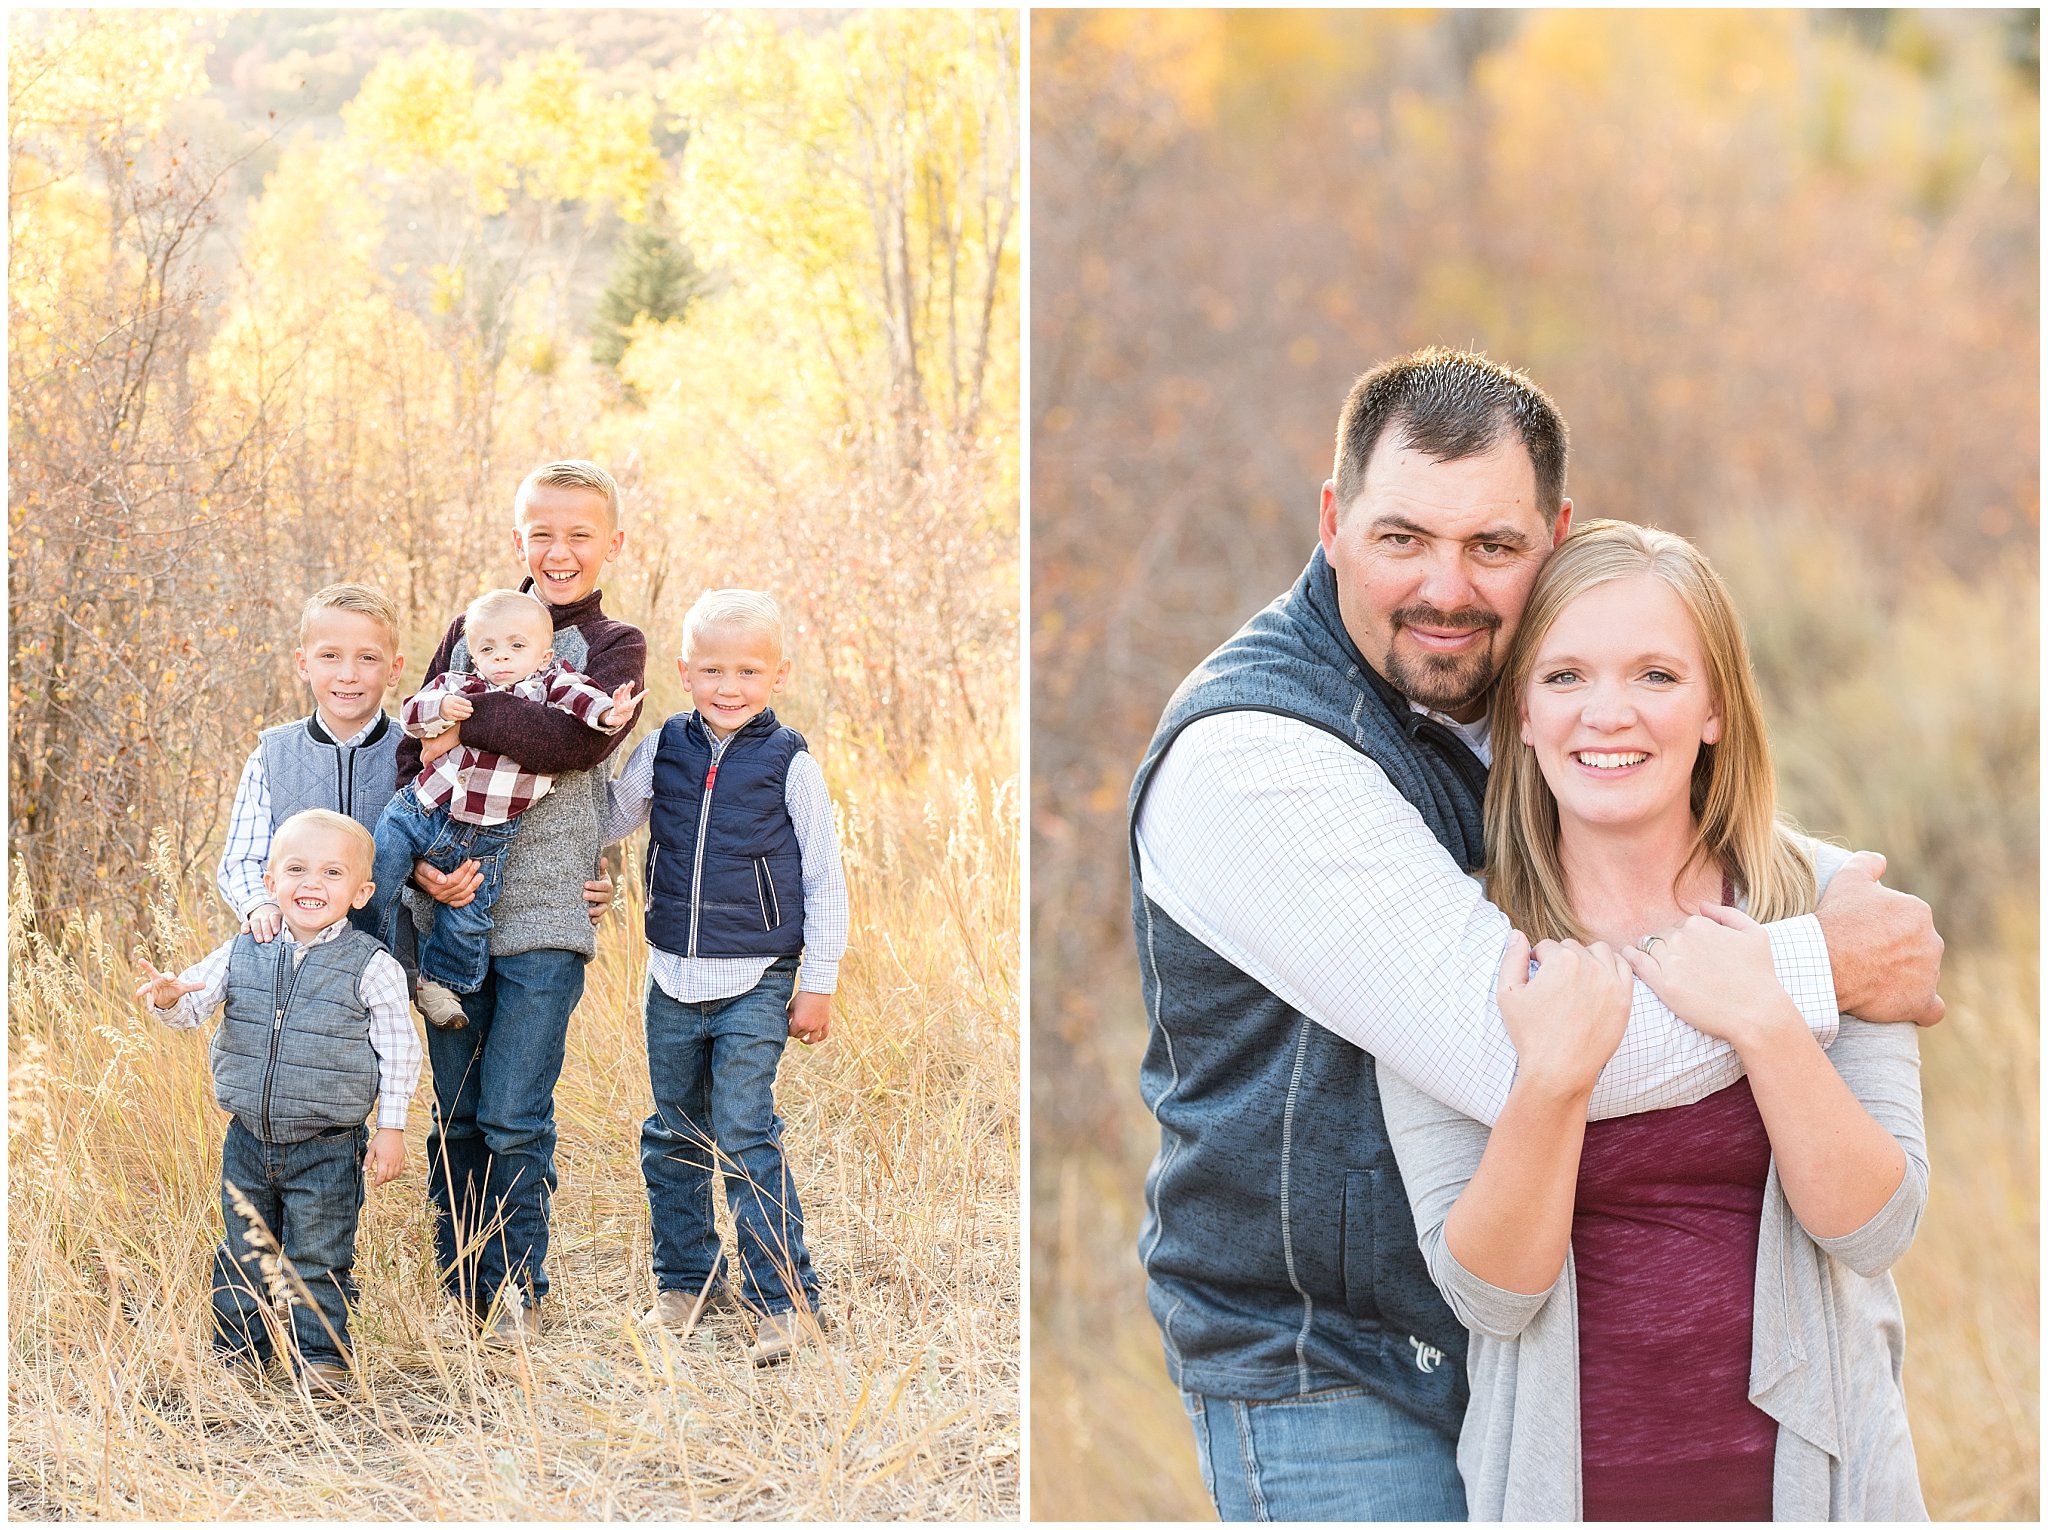 Mom and Dad, and 5 brothers | Fall family photo session at Snowbasin | Snowbasin Resort | Jessie and Dallin Photography